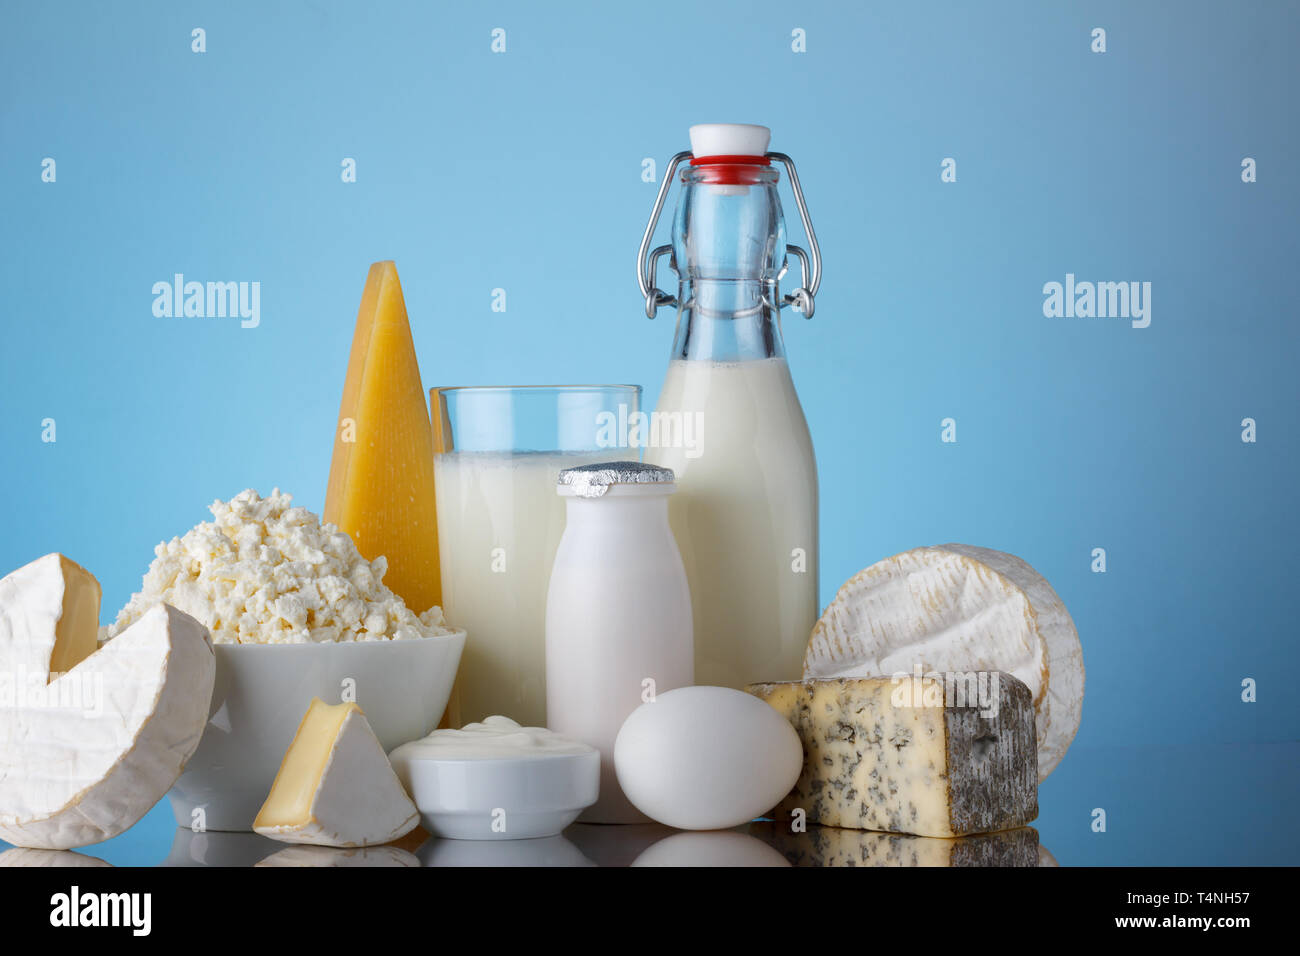 https://c8.alamy.com/comp/T4NH57/dairy-products-on-blue-background-with-copy-space-T4NH57.jpg